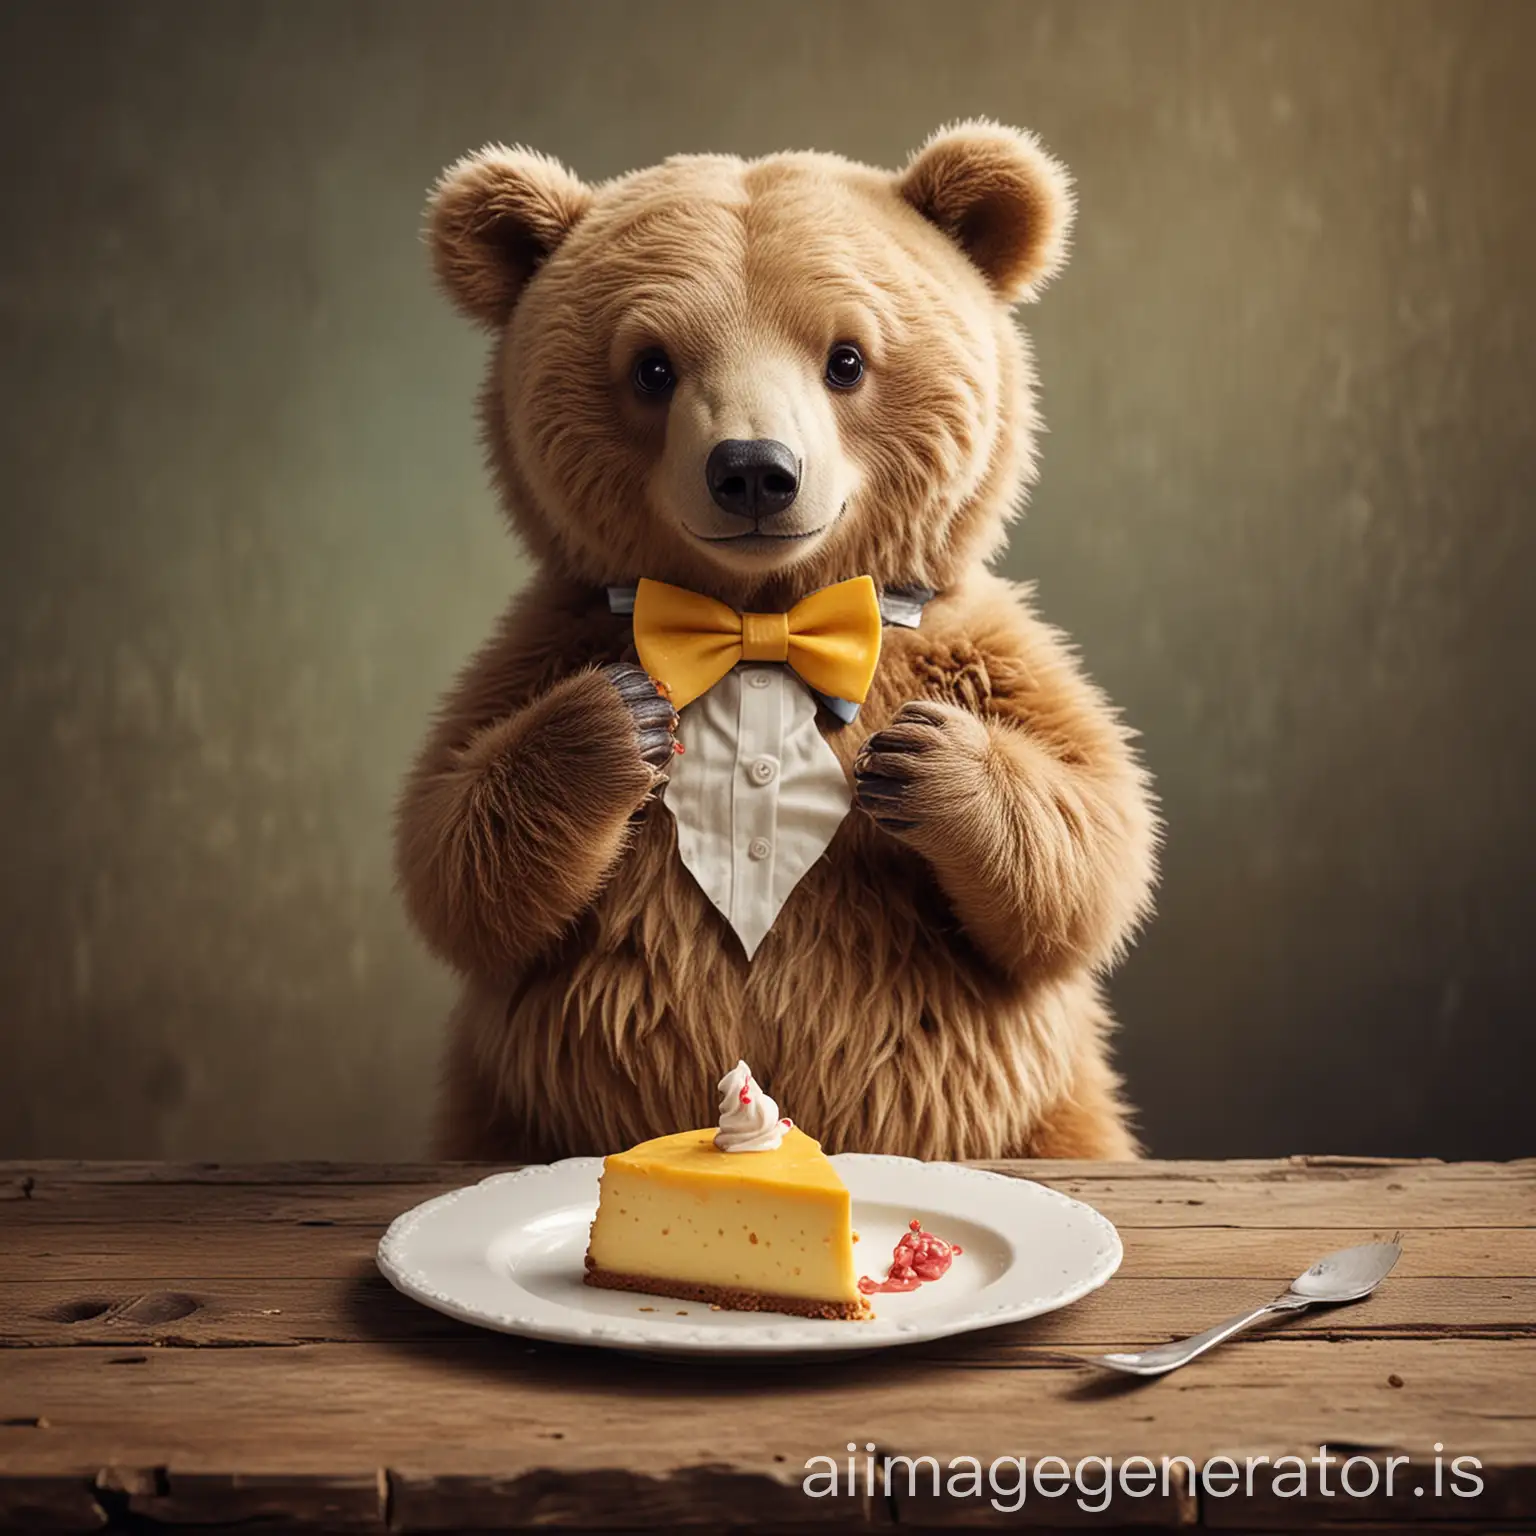 A cute bear wearing a bow tie and eating a cheese cake